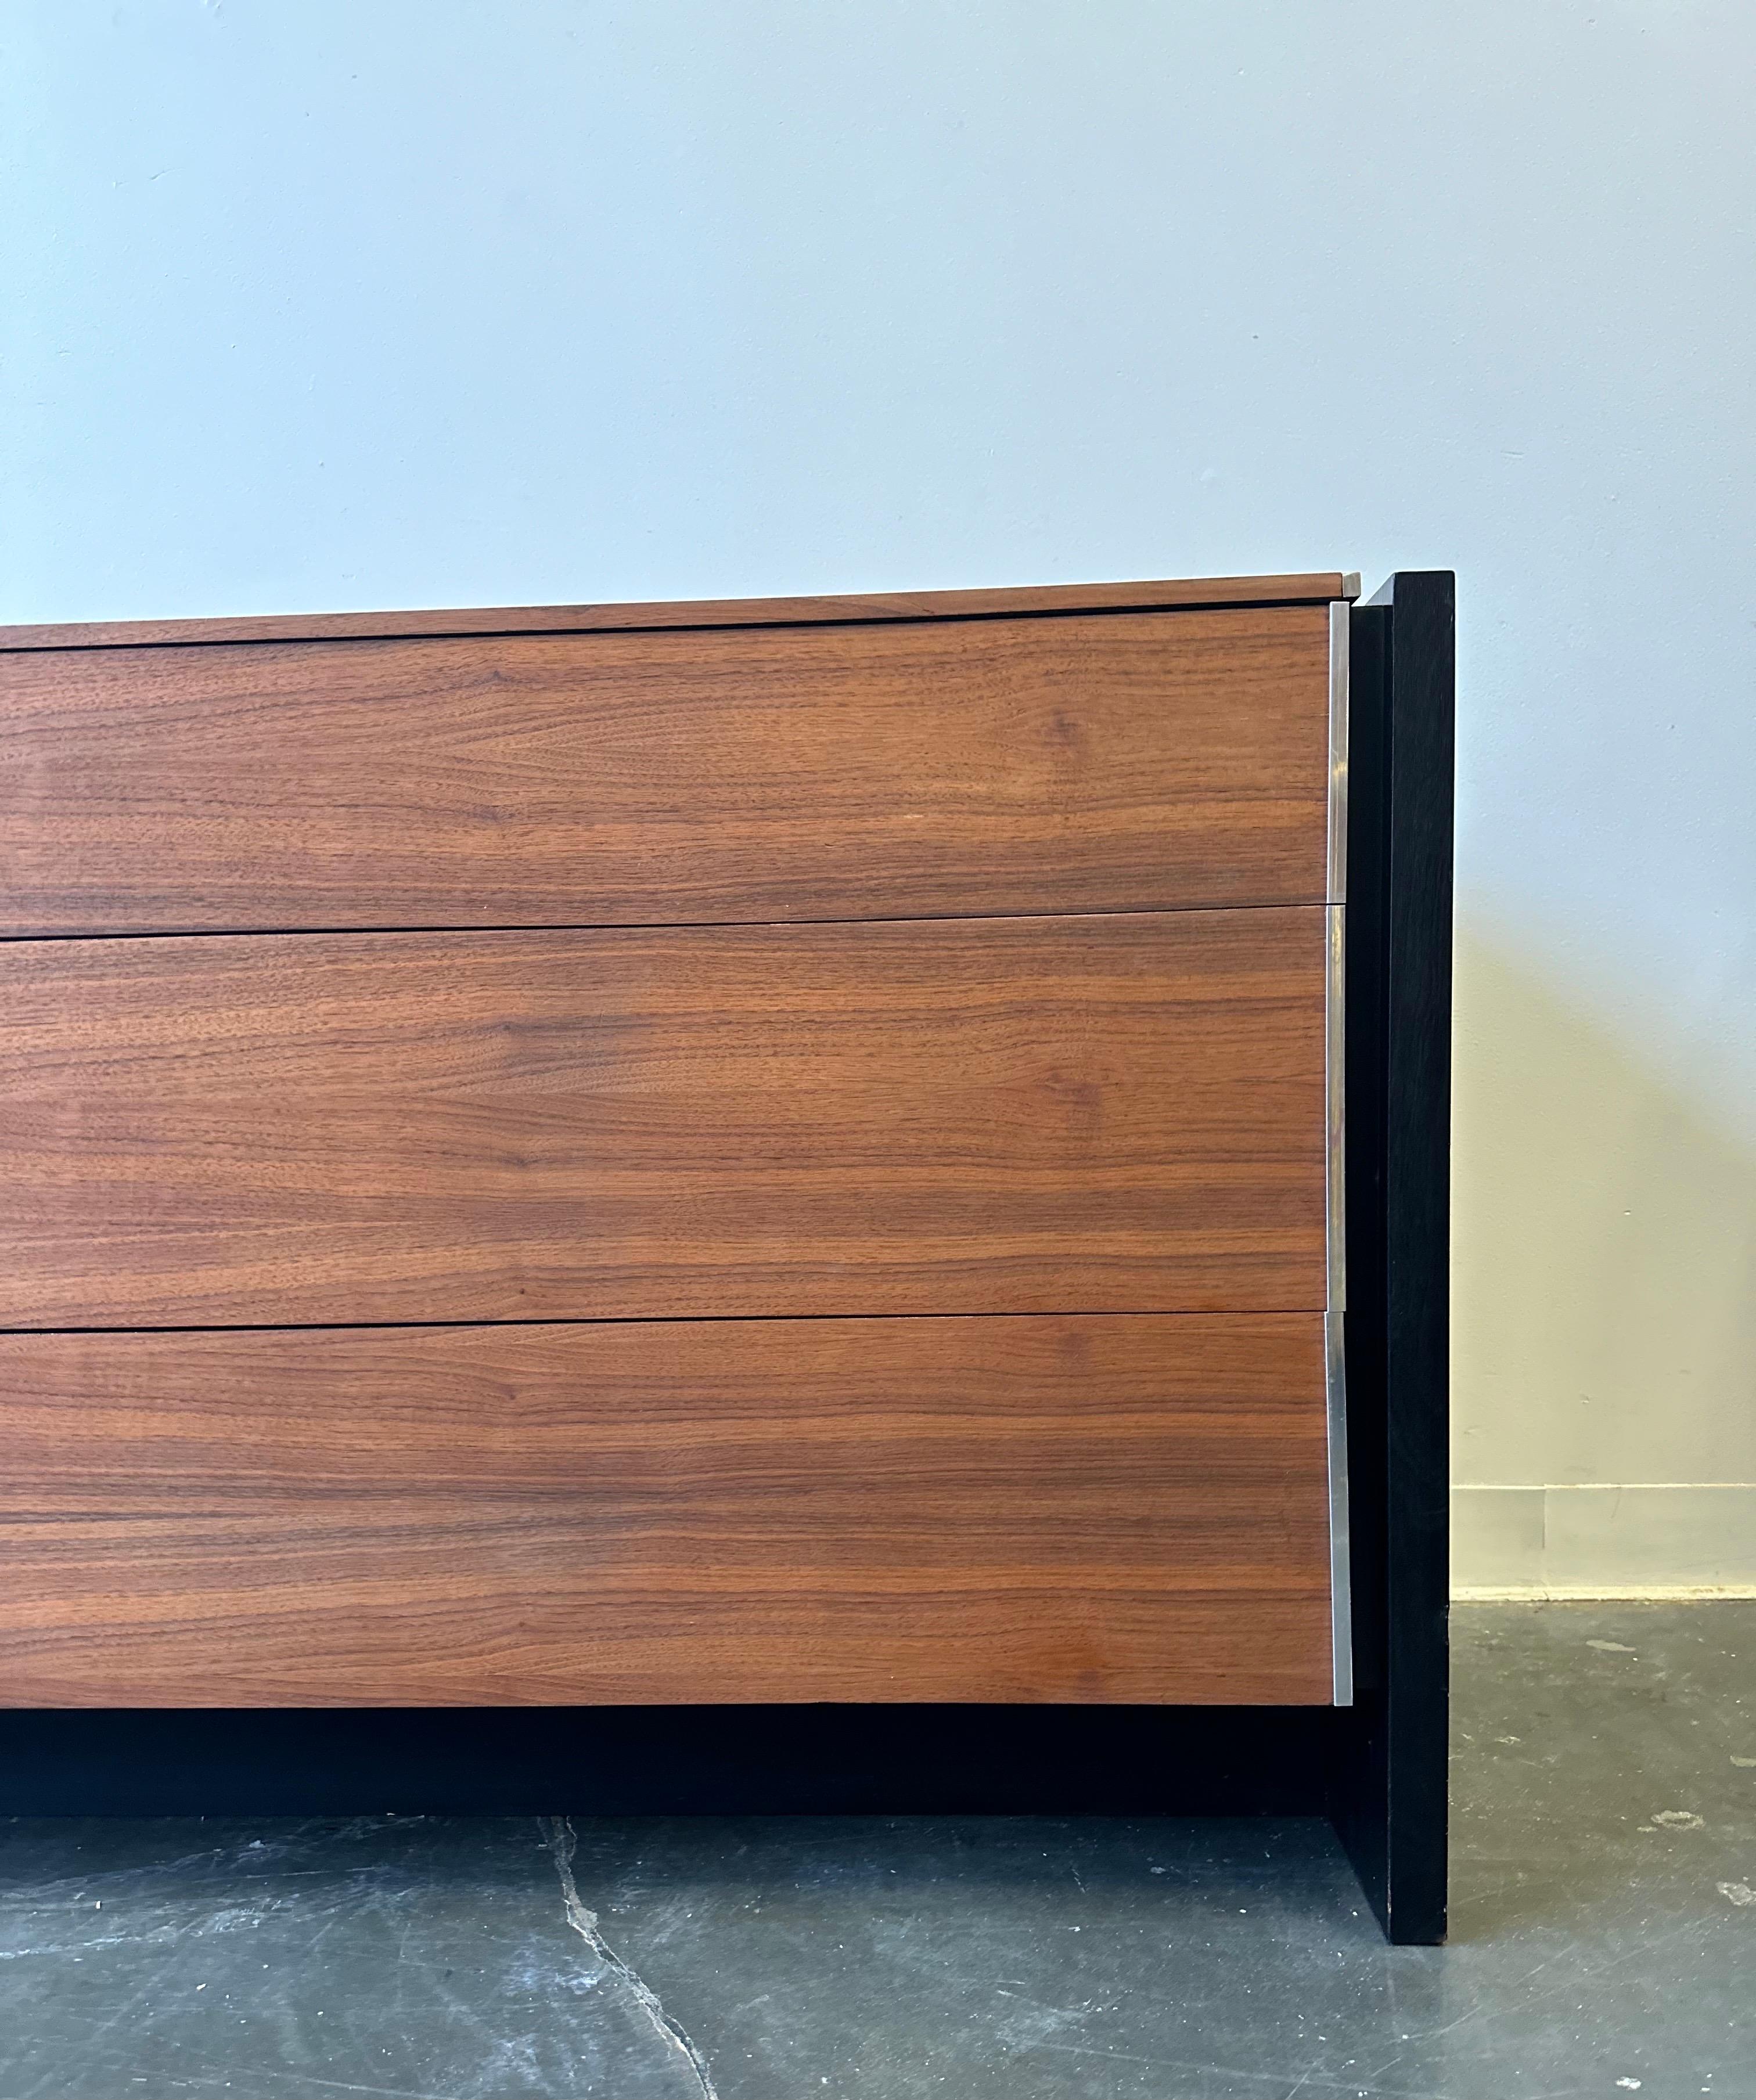 ROBERT BARON GLENN of CALIFORNIA Walnut Credenza Sideboard Dresser. Ebonized oak panel sides. Recessed black platform base. Stainless trim.

The walnut has been refinished and the black touched up.  This is in fantastic condition.

Dimensions: H: